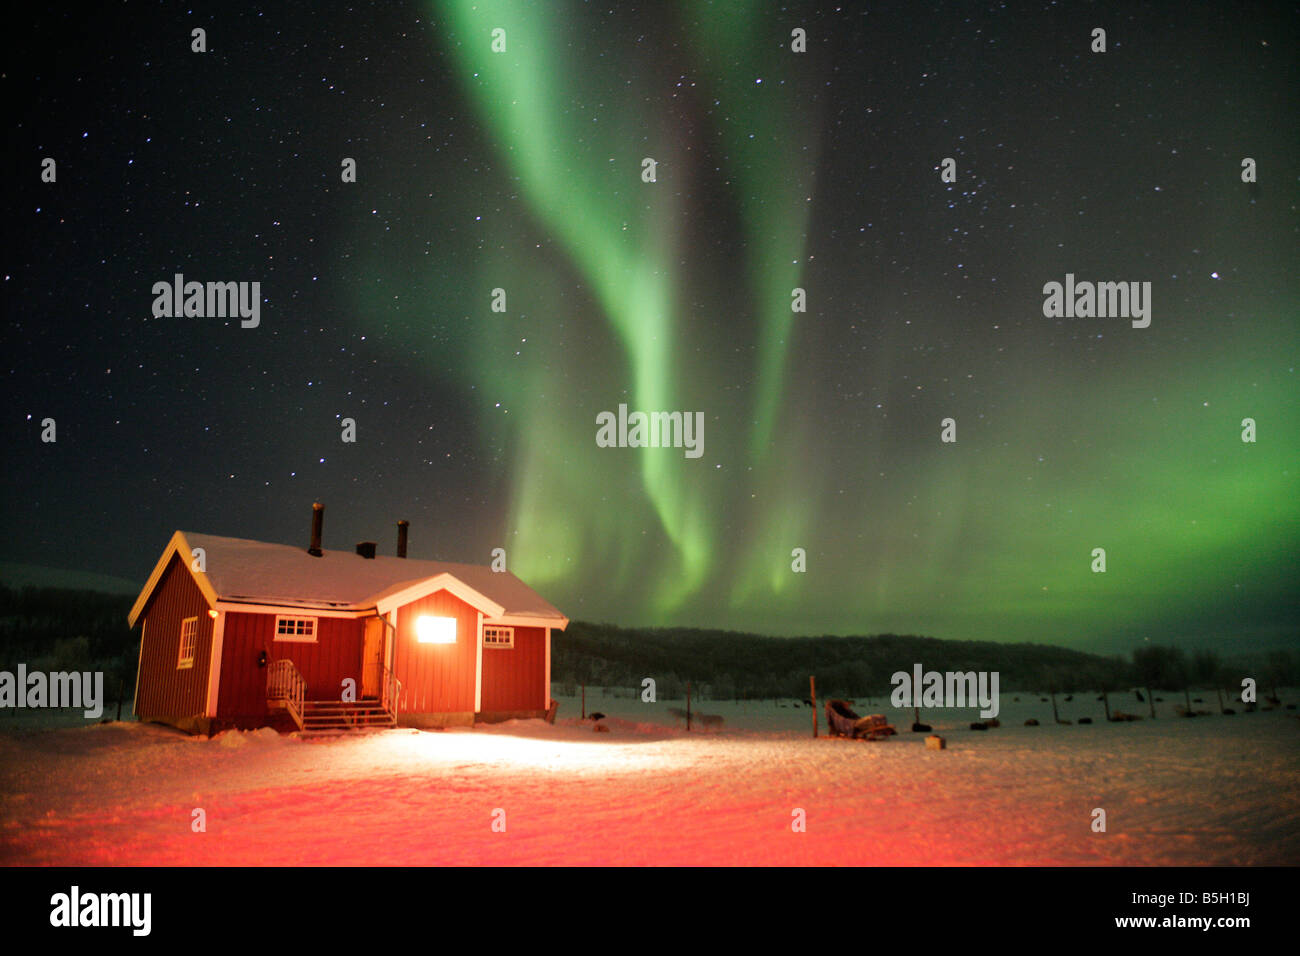 Hut in Northern Norway in the arctic circle with the Arora Borealis or Northern lights overhead Stock Photo